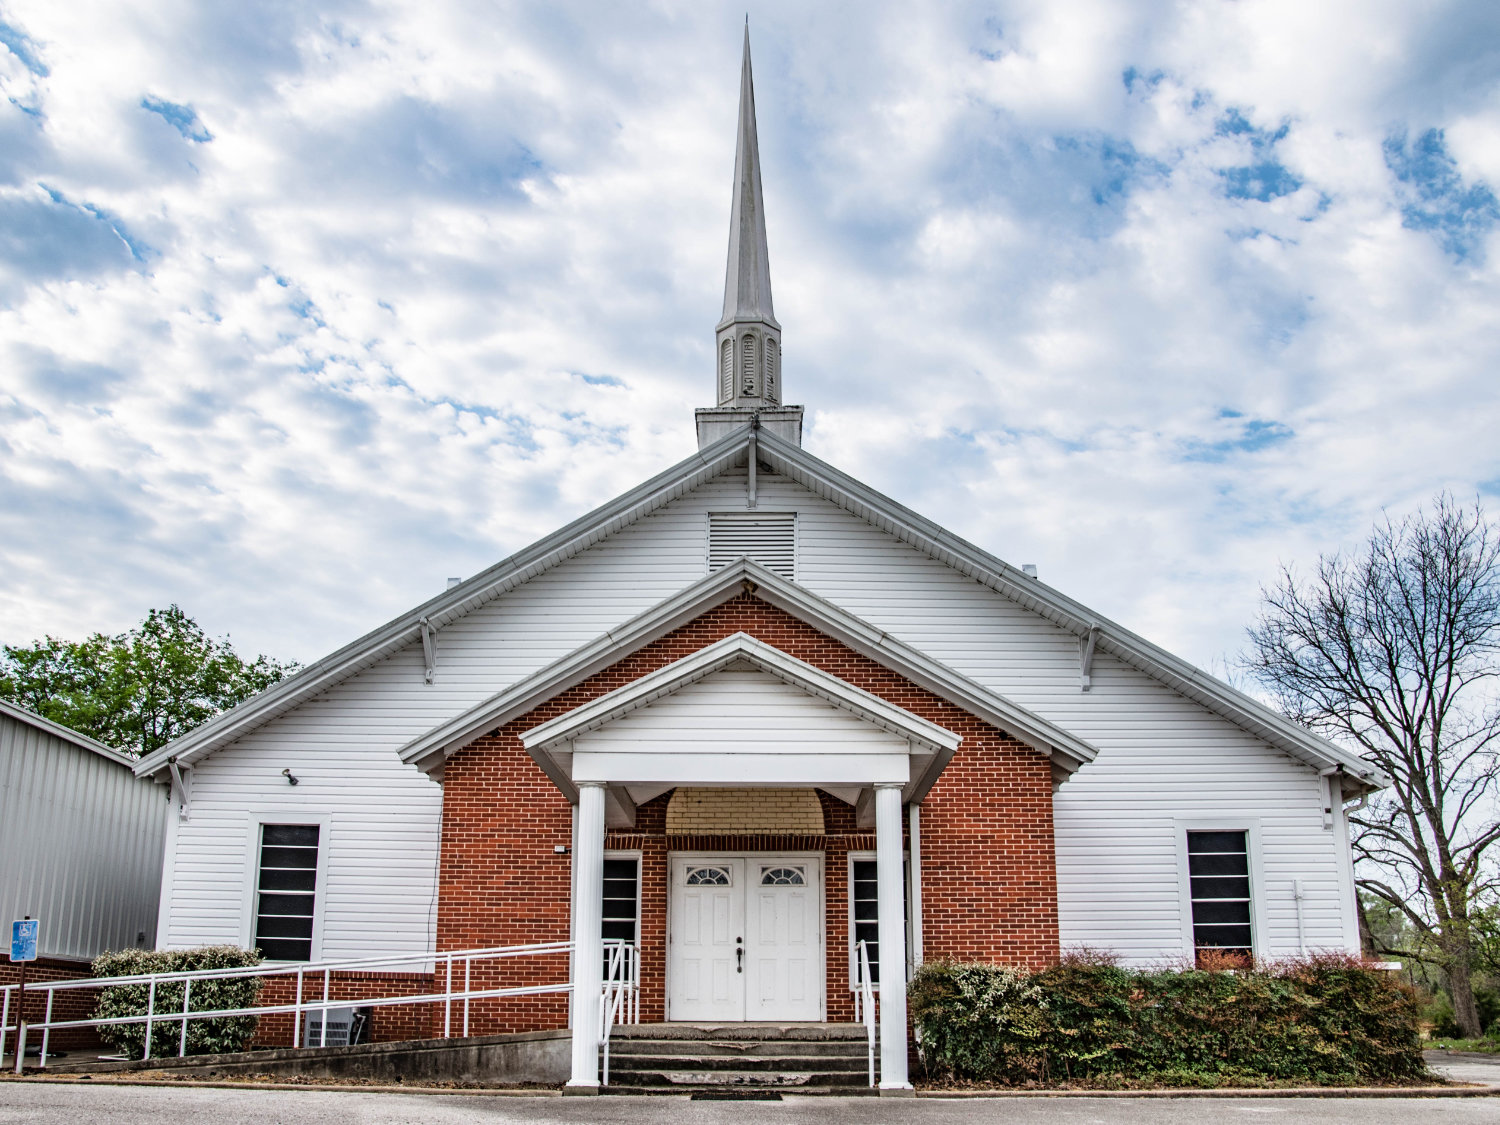 The first Hainesville Baptist Church building was constructed in 1927 at FM49 and FM778.